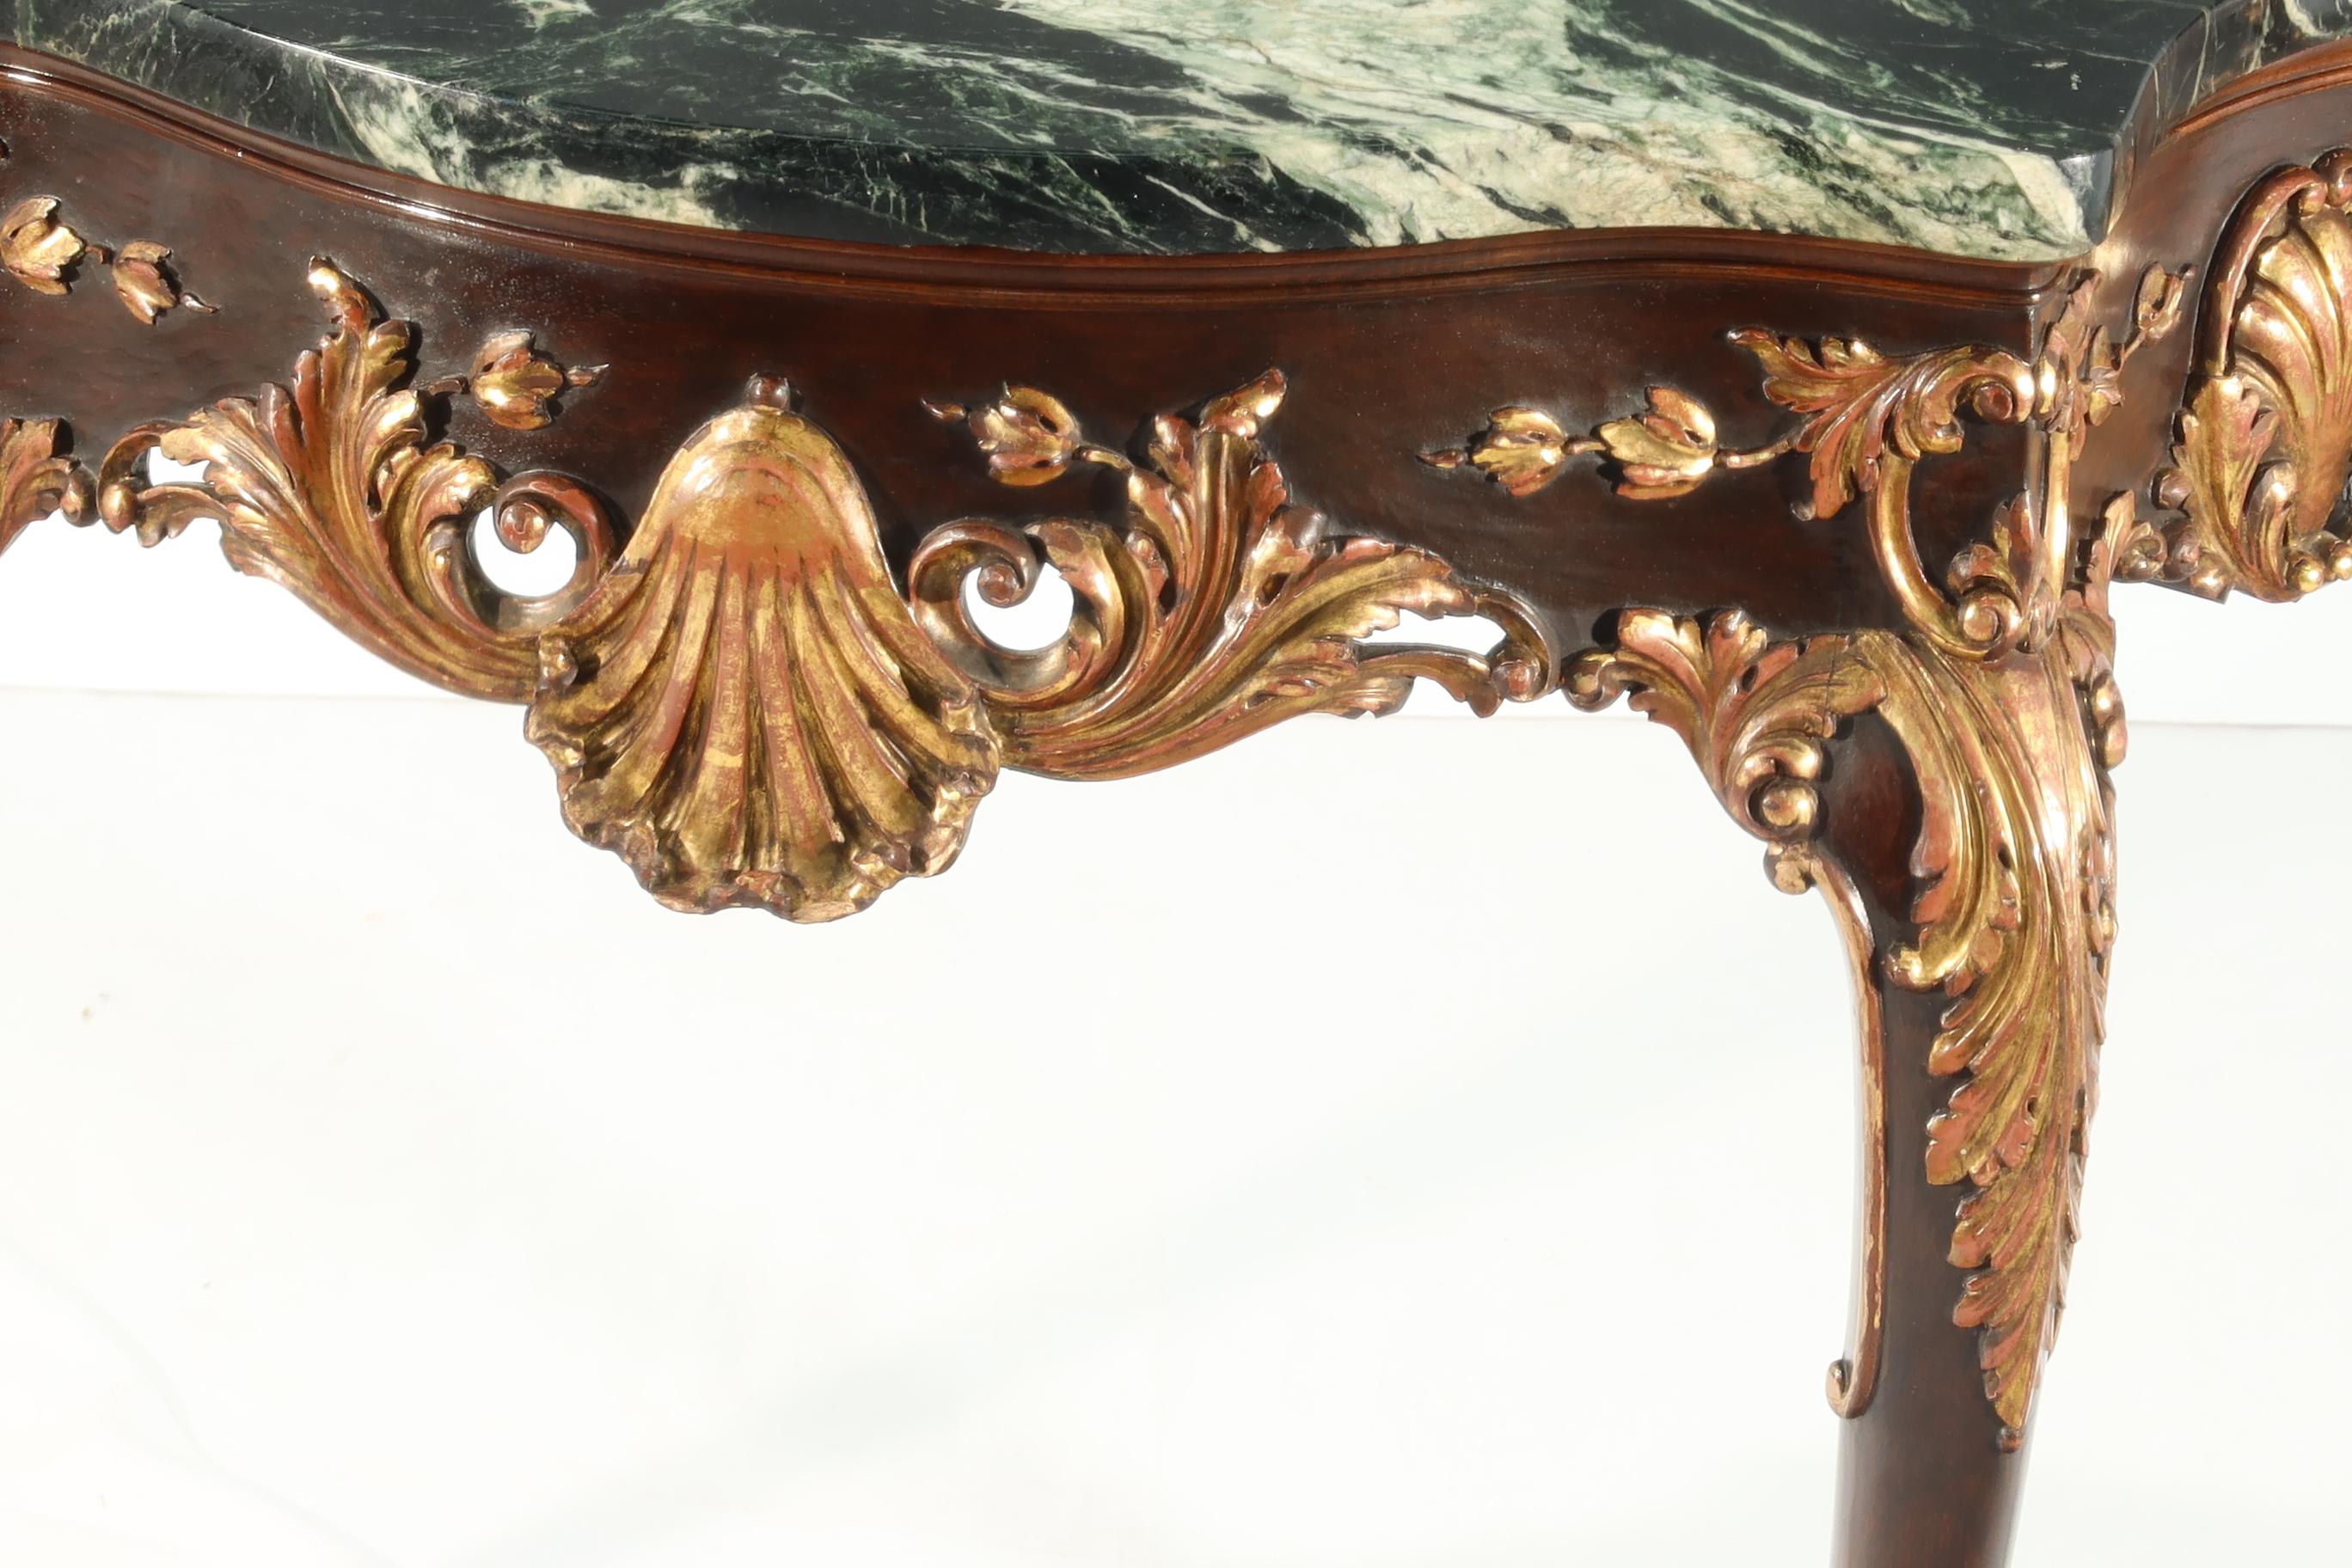 Vintage English reproduction of a George II carved mahogany and gilt console table with well-shaped front and dark green and white mottled marble top. The well-shaped cabriole legs terminated in finely carved claw and ball feet. A finely crafted